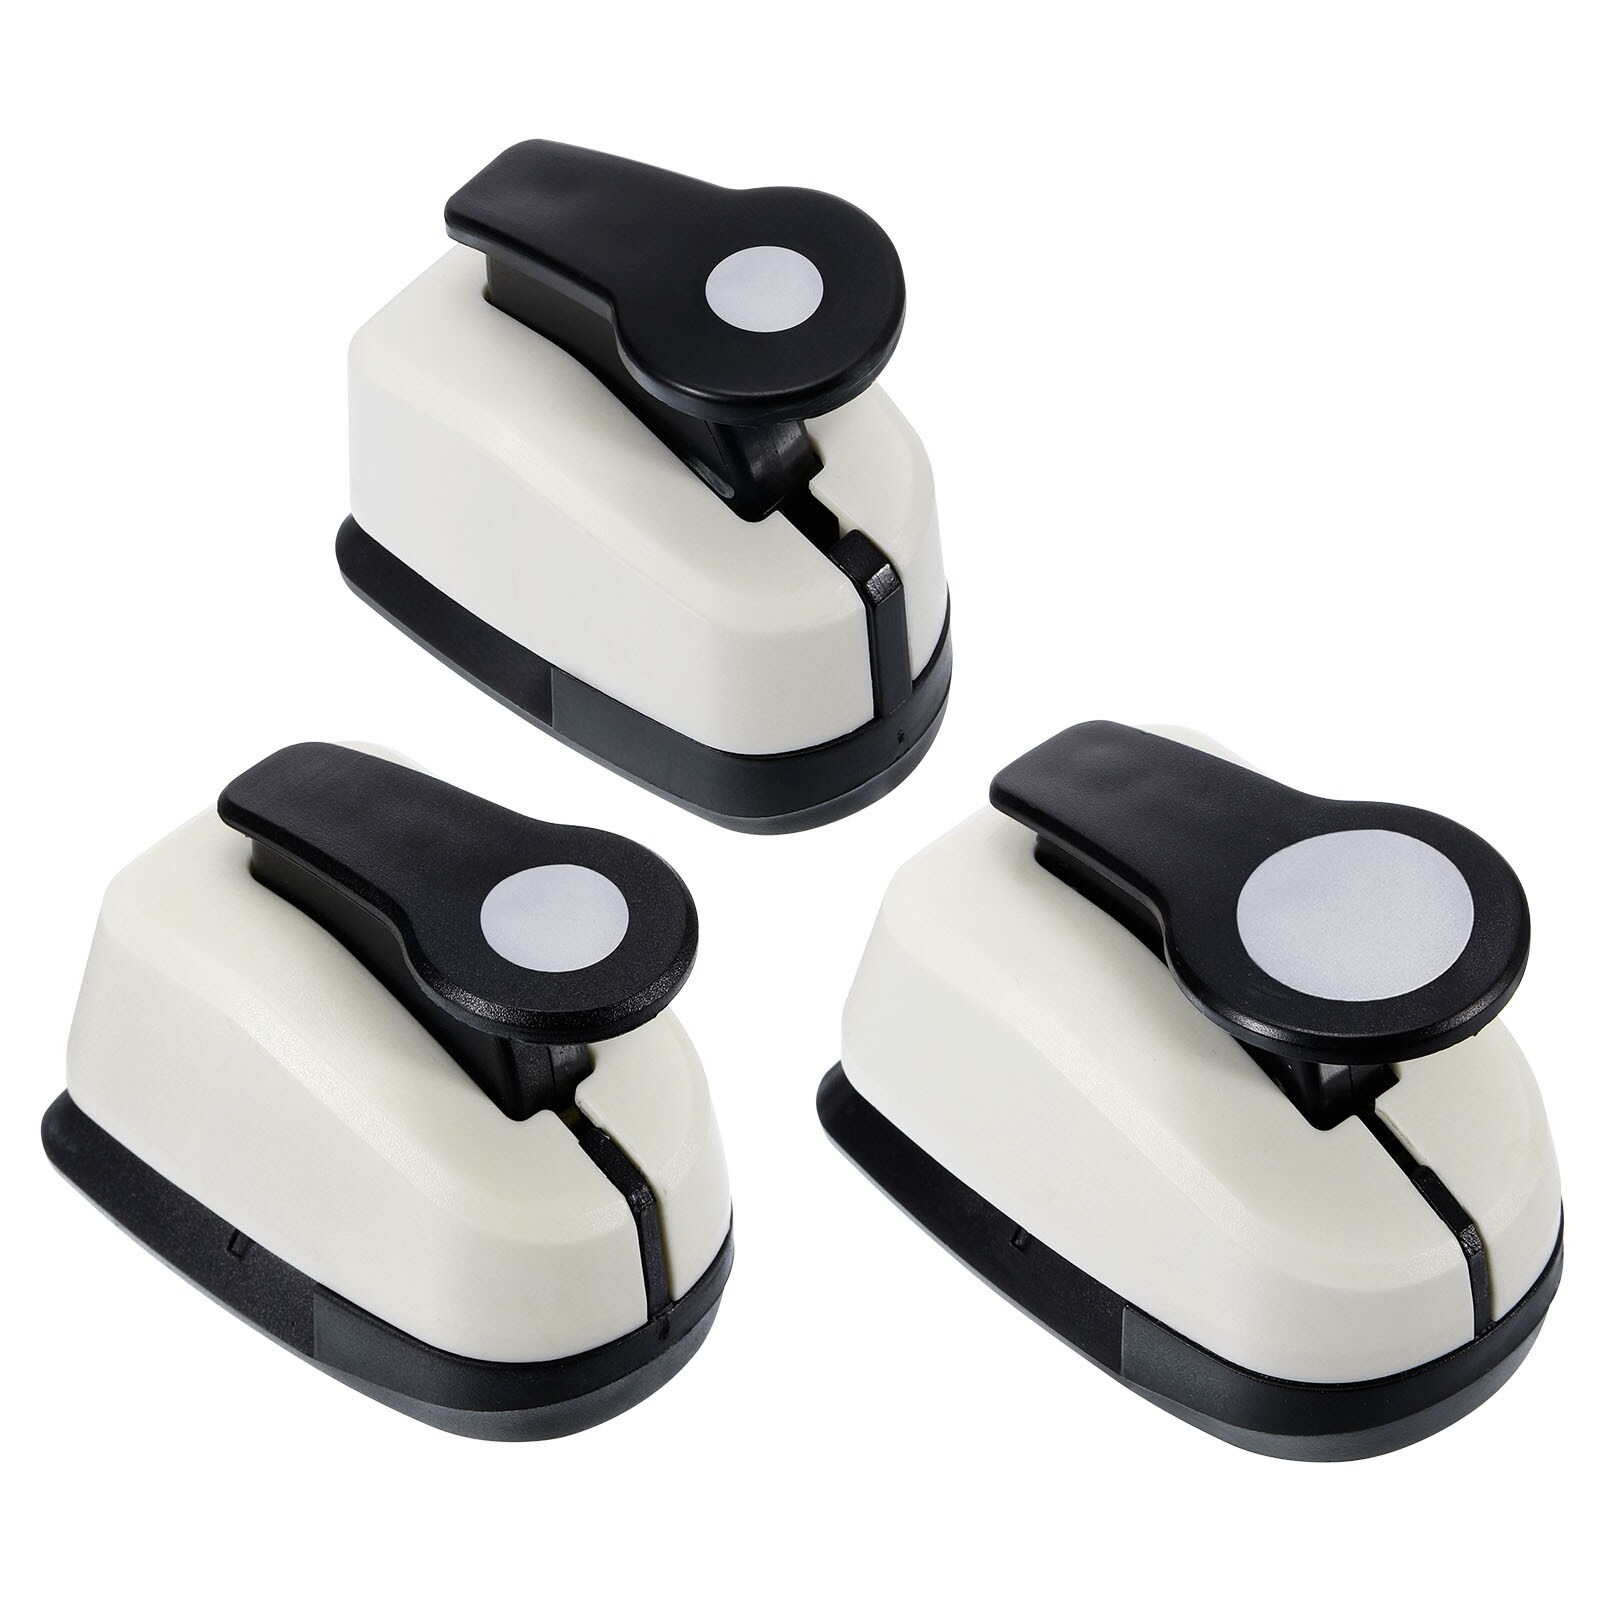 0.4 & 0.6 & 1 Inch Circle Punch, Hole Paper Punch Hole Puncher Punches -  White, Black - On Sale - Bed Bath & Beyond - 38236369